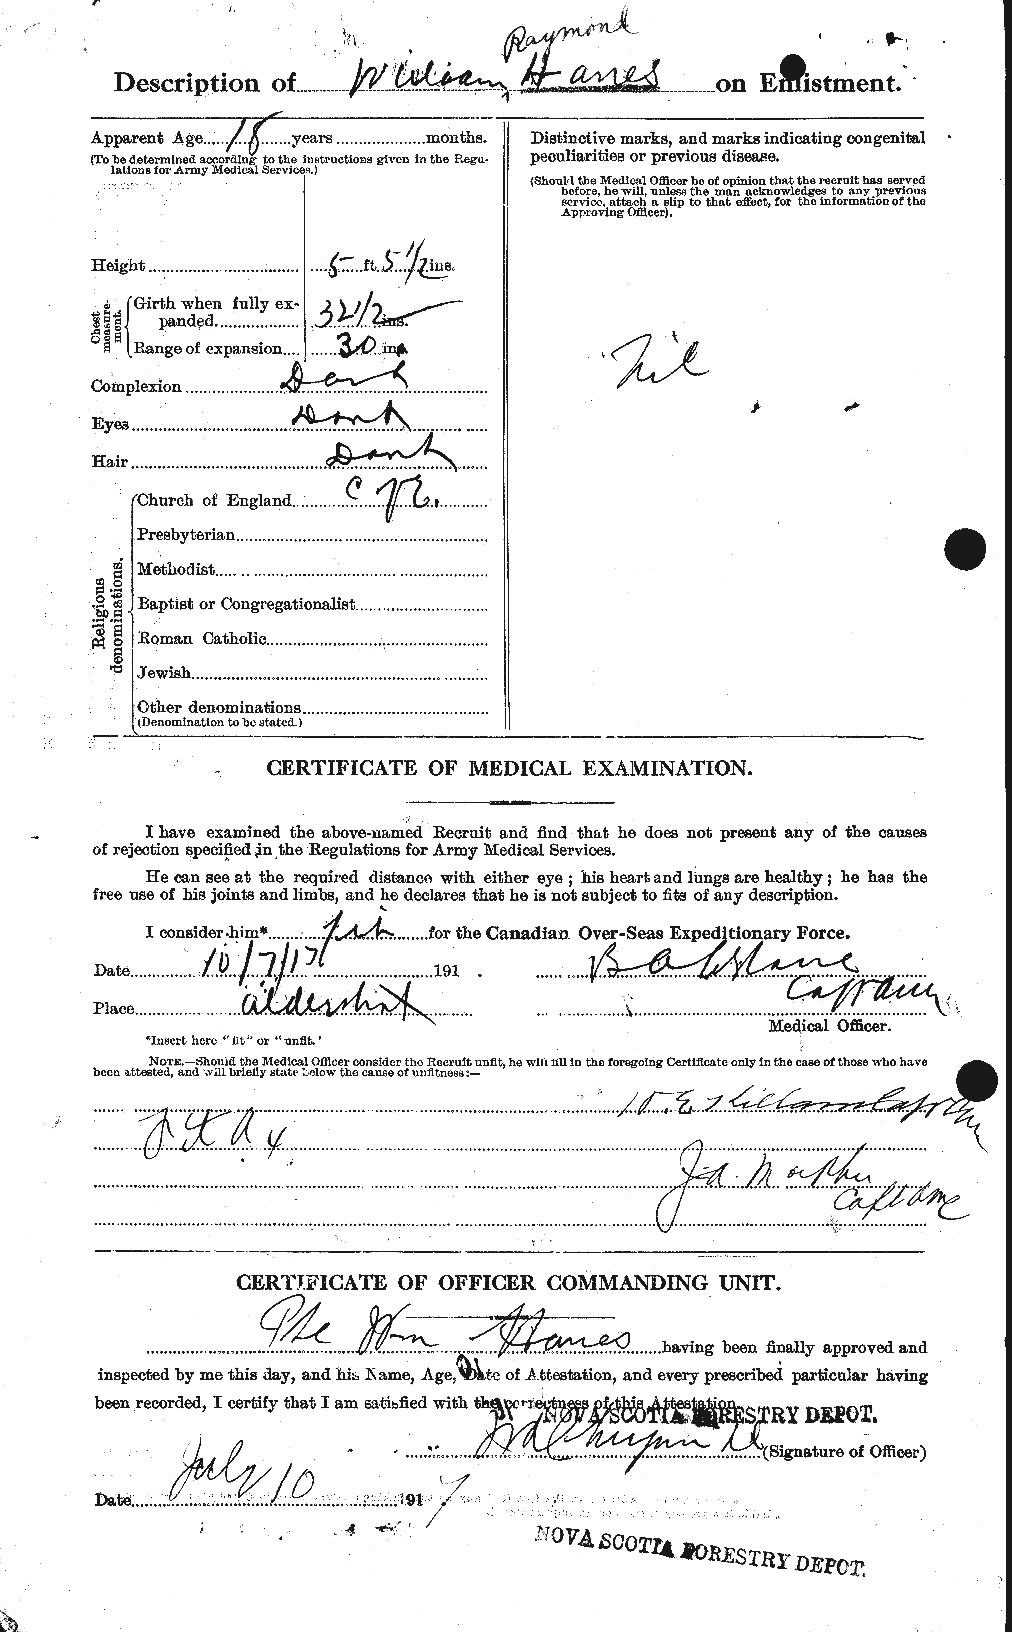 Personnel Records of the First World War - CEF 375787b